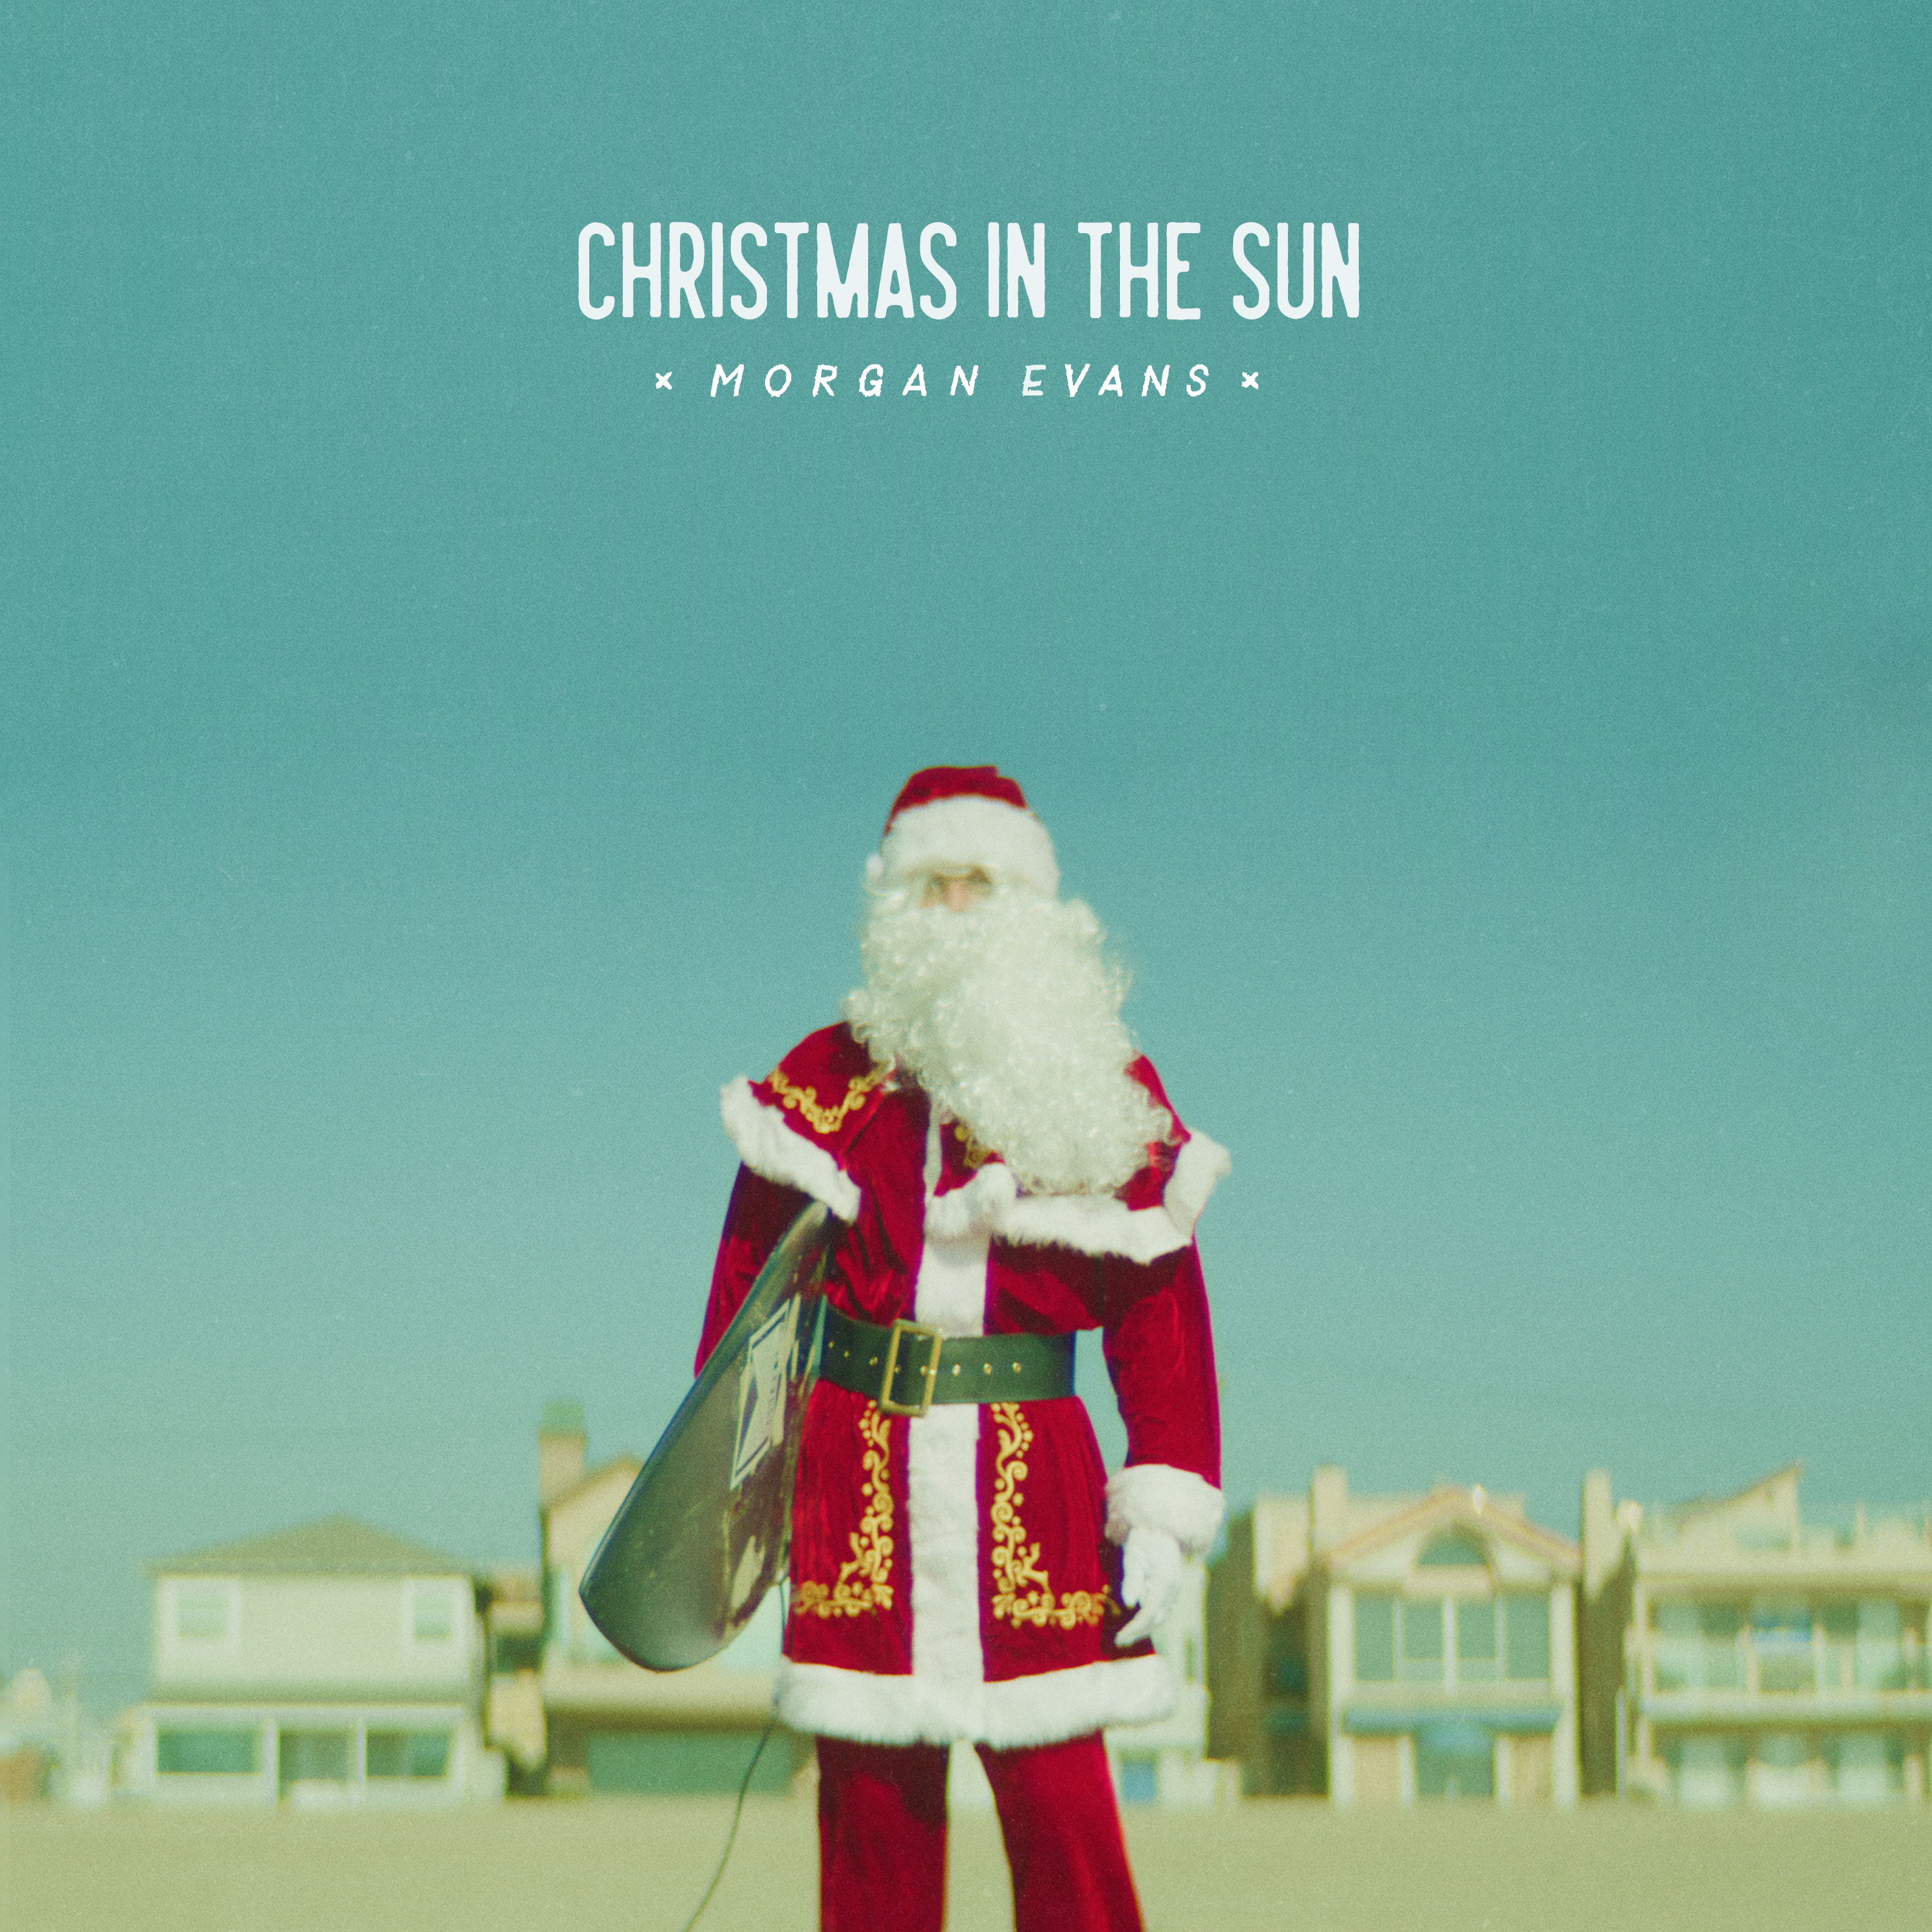 MORGAN EVANS RELEASES FIRST ORIGINAL HOLIDAY SONG, “CHRISTMAS IN THE SUN,” TODAY